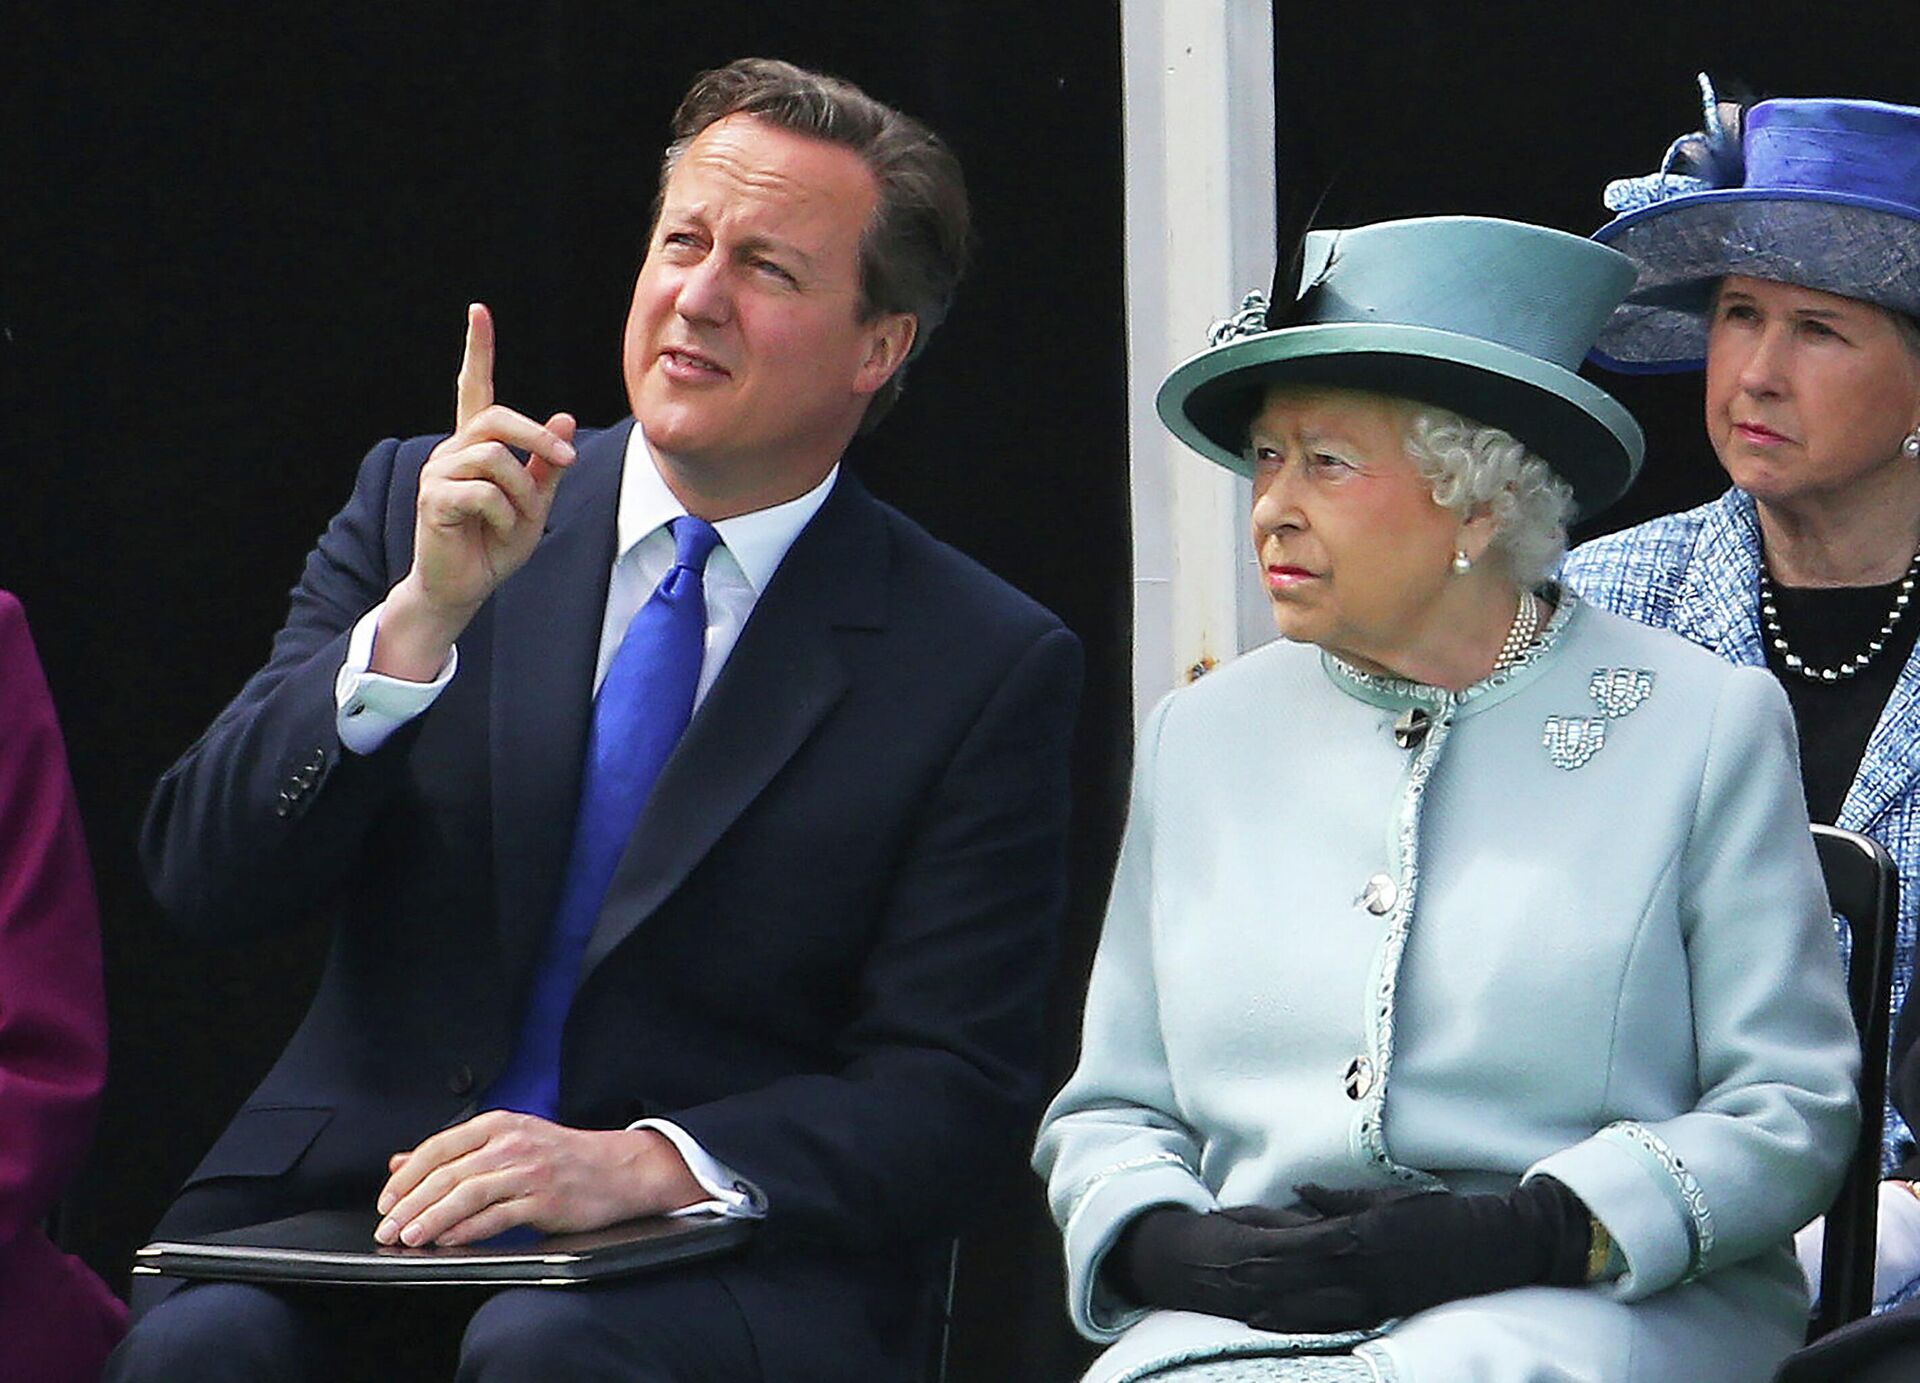 FILE - Seated near the Magna Carta memorial at Runnymede, England, are Prime Minister David Cameron, and Queen Elizabeth II, ahead of a commemoration ceremony Monday June 15, 2015, to celebrate the 800th anniversary of the groundbreaking accord called Magna Carta. - Sputnik International, 1920, 09.09.2022